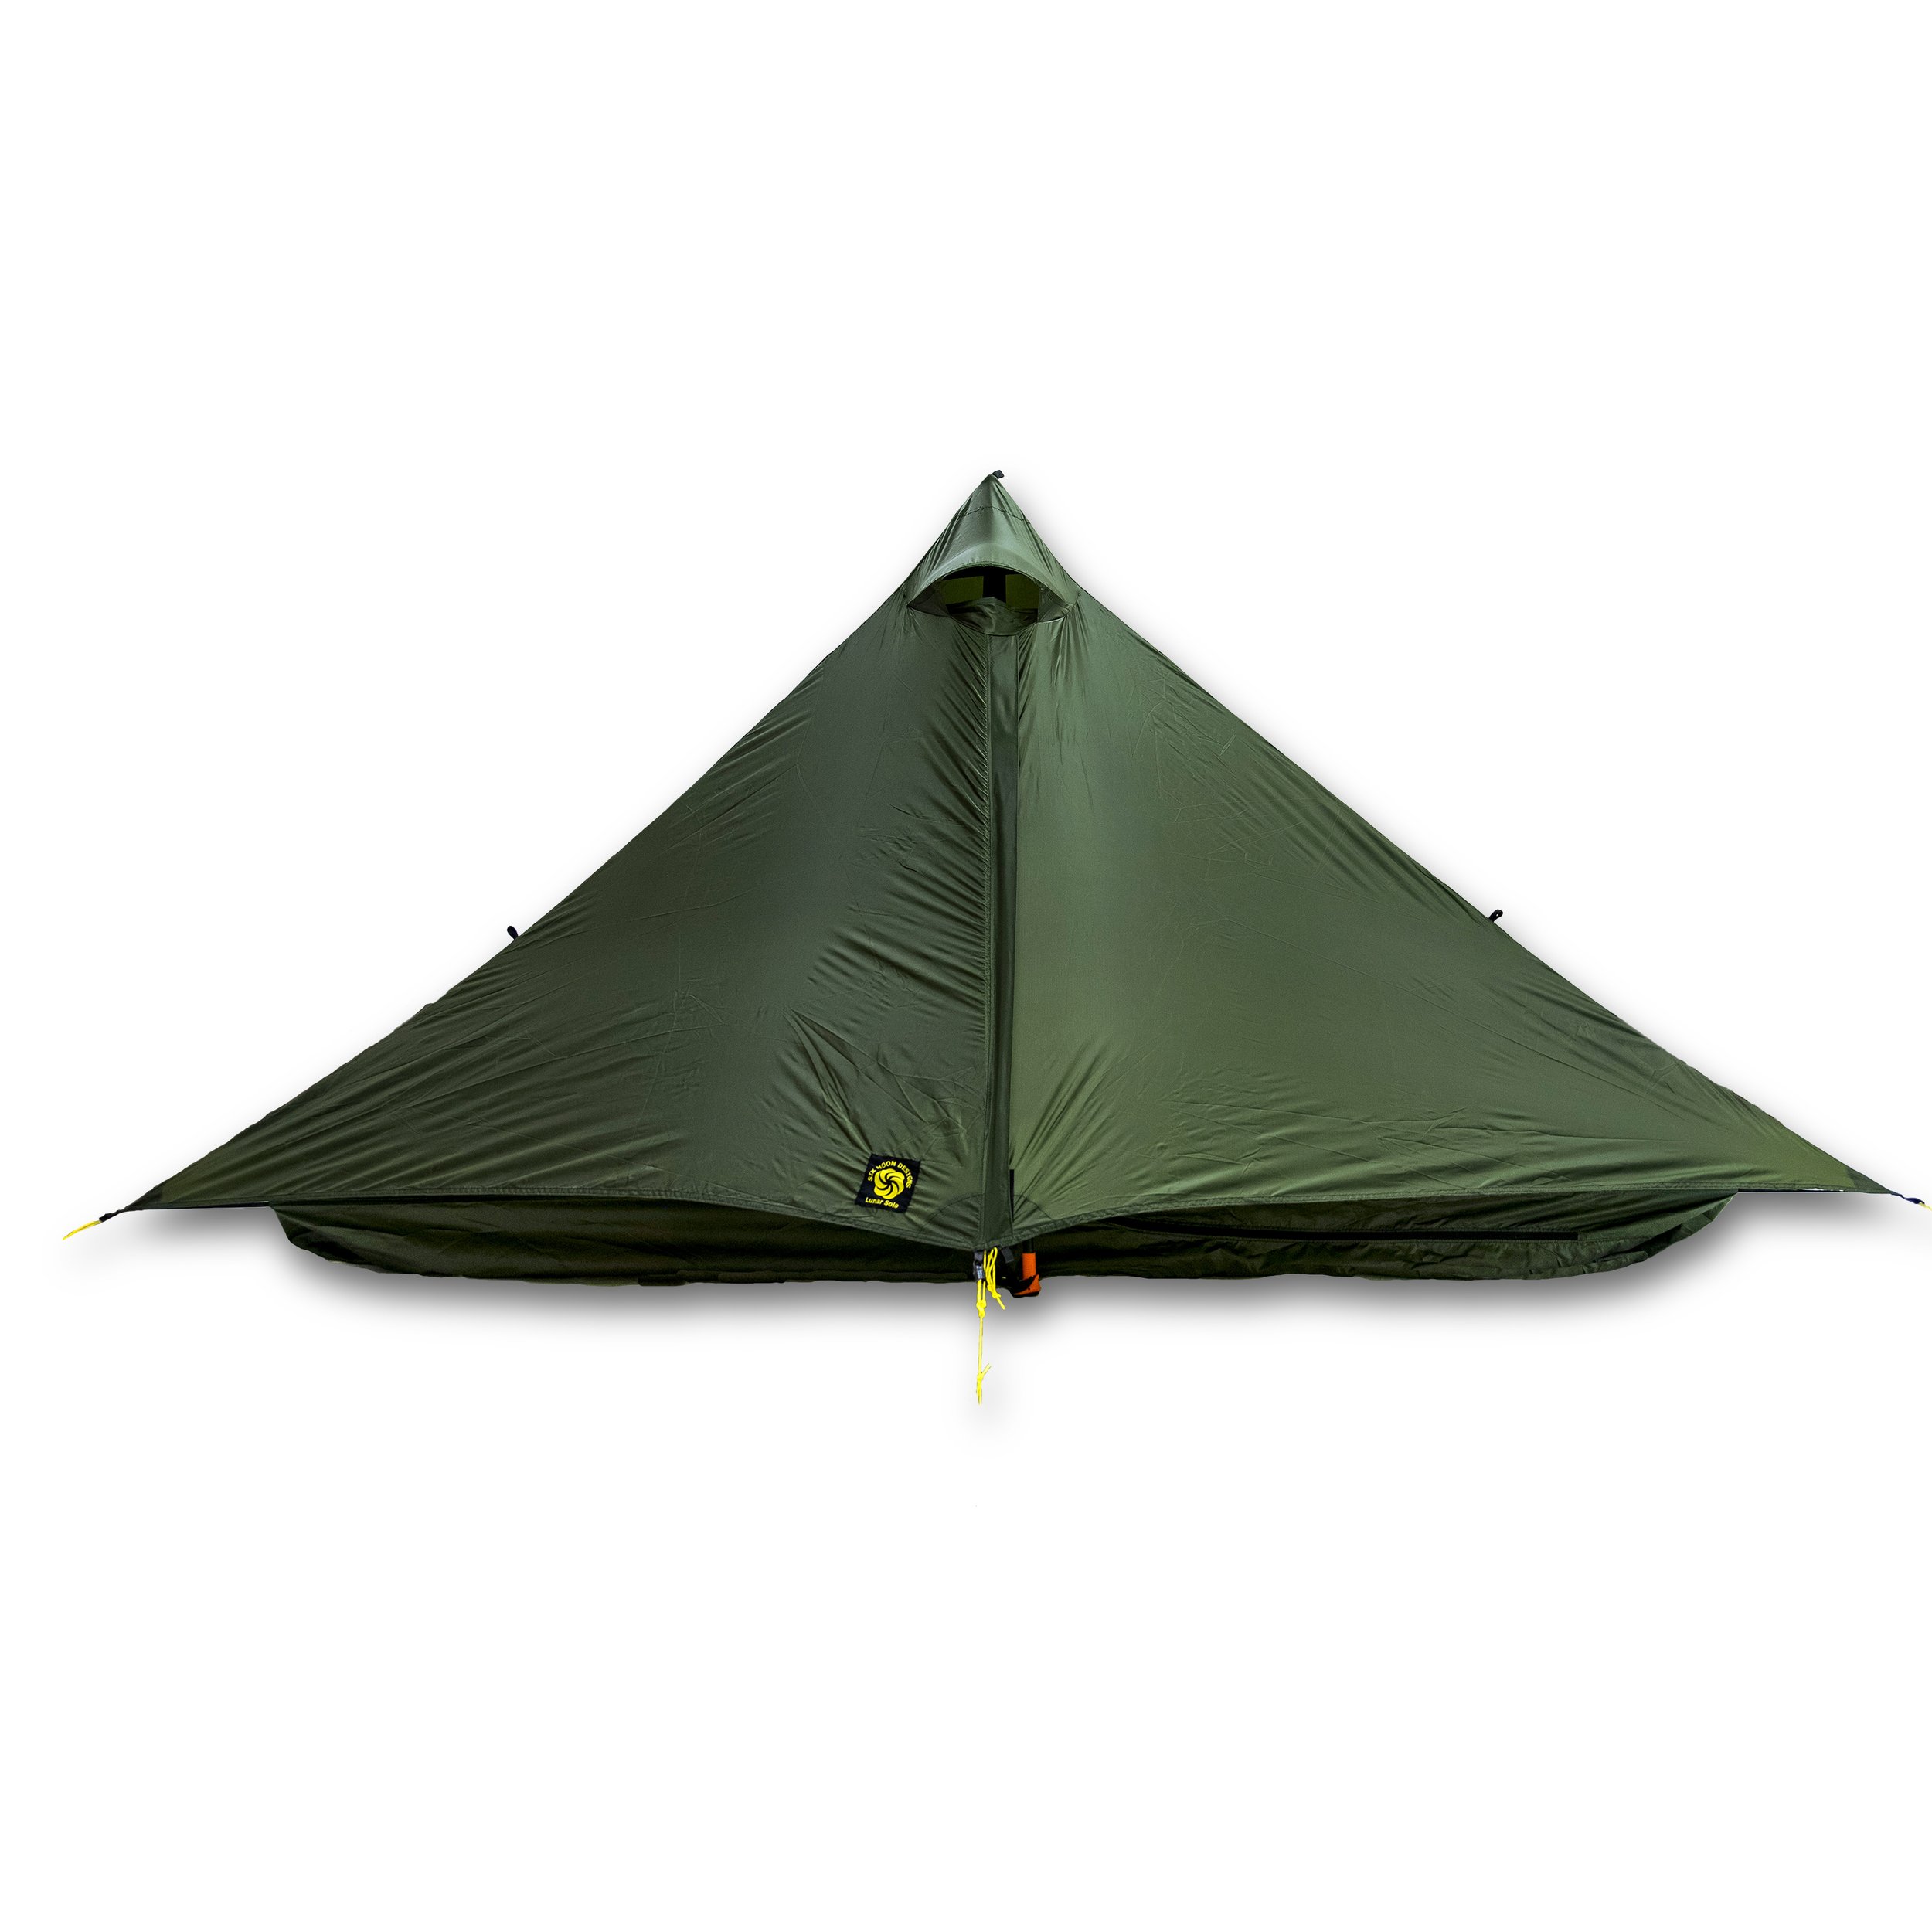 Six Moon Designs Lunar Solo Tent - 718 Cyclery